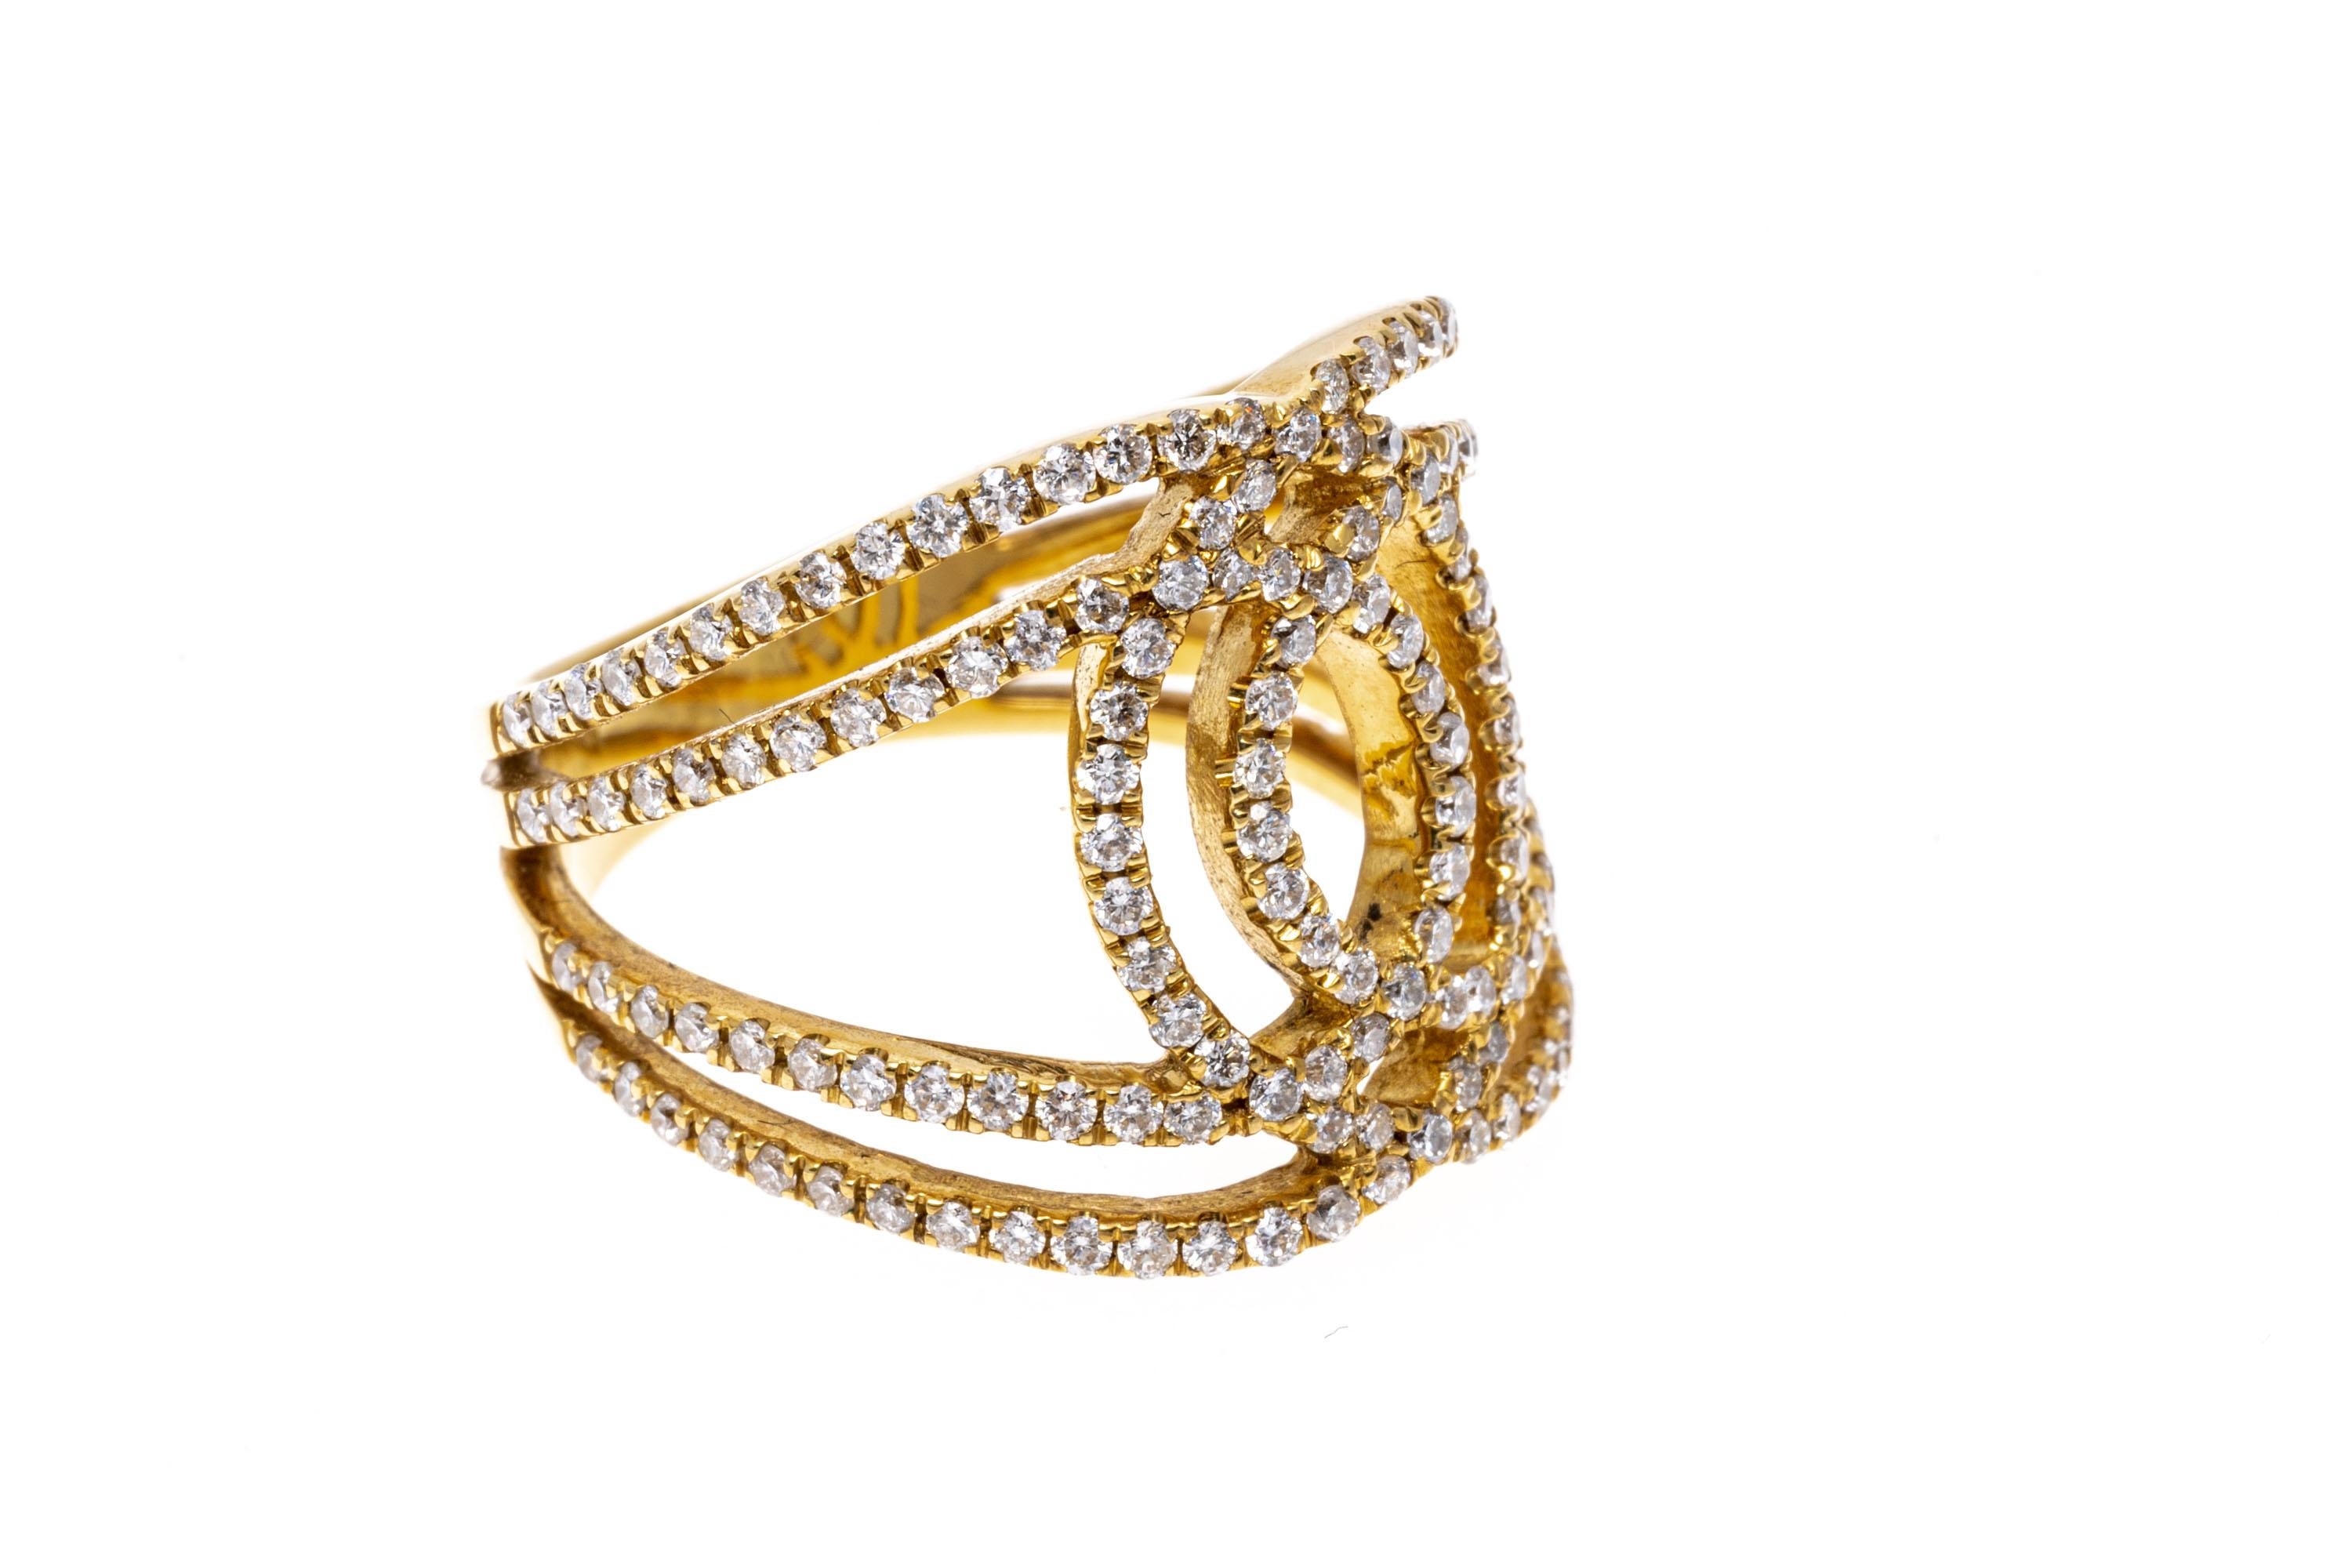 A super chic 18K yellow gold ring. Interwoven and over lapping trails of diamonds create an eye-catching and brilliant display. The diamonds are approximately 1.2 TCW. Ring size 7.5.
Marks: 18K
Dimensions: 11/16